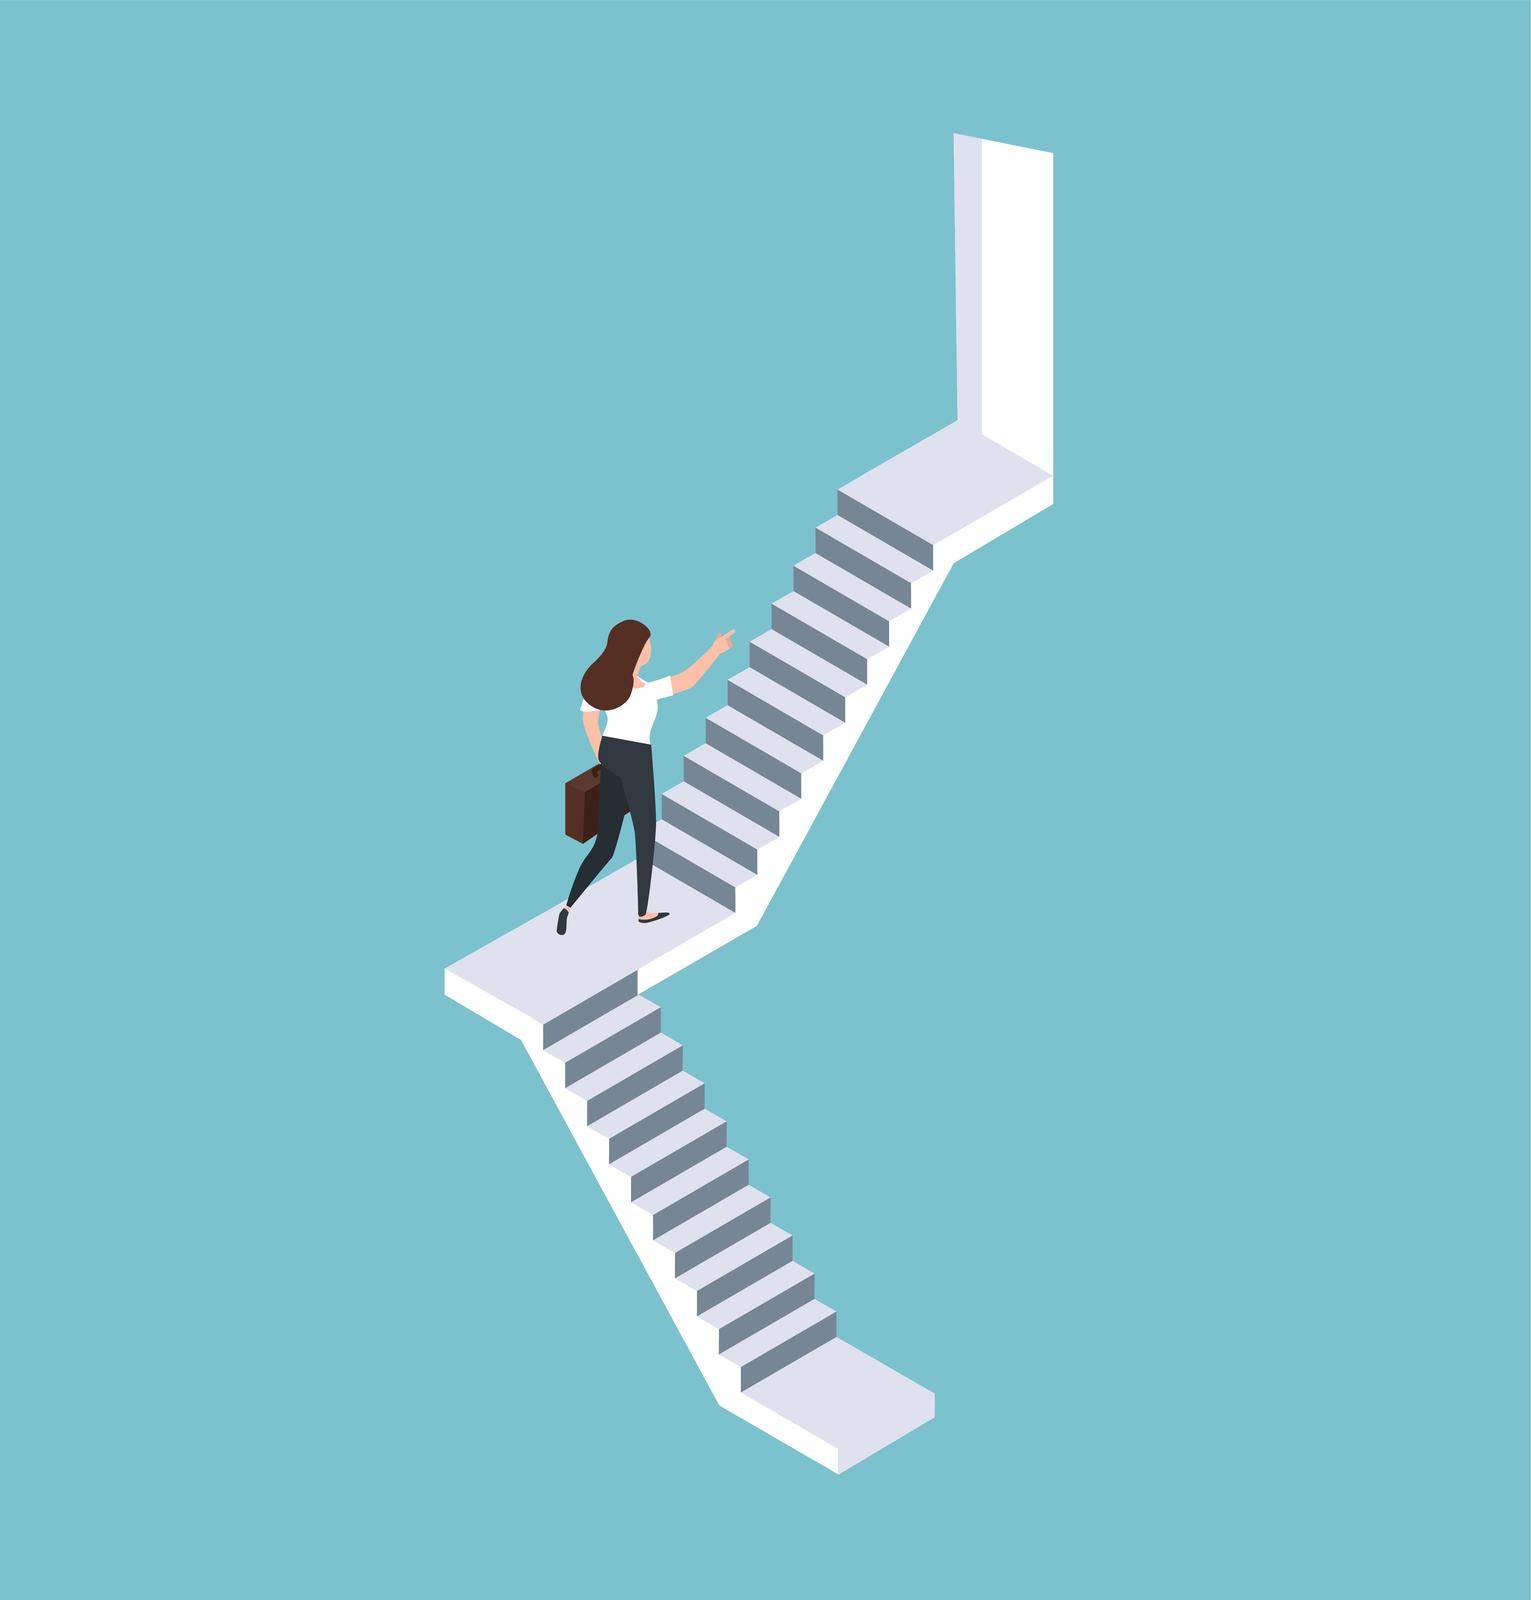 Businesswoman walking up staircase isometric concept by focus_bell